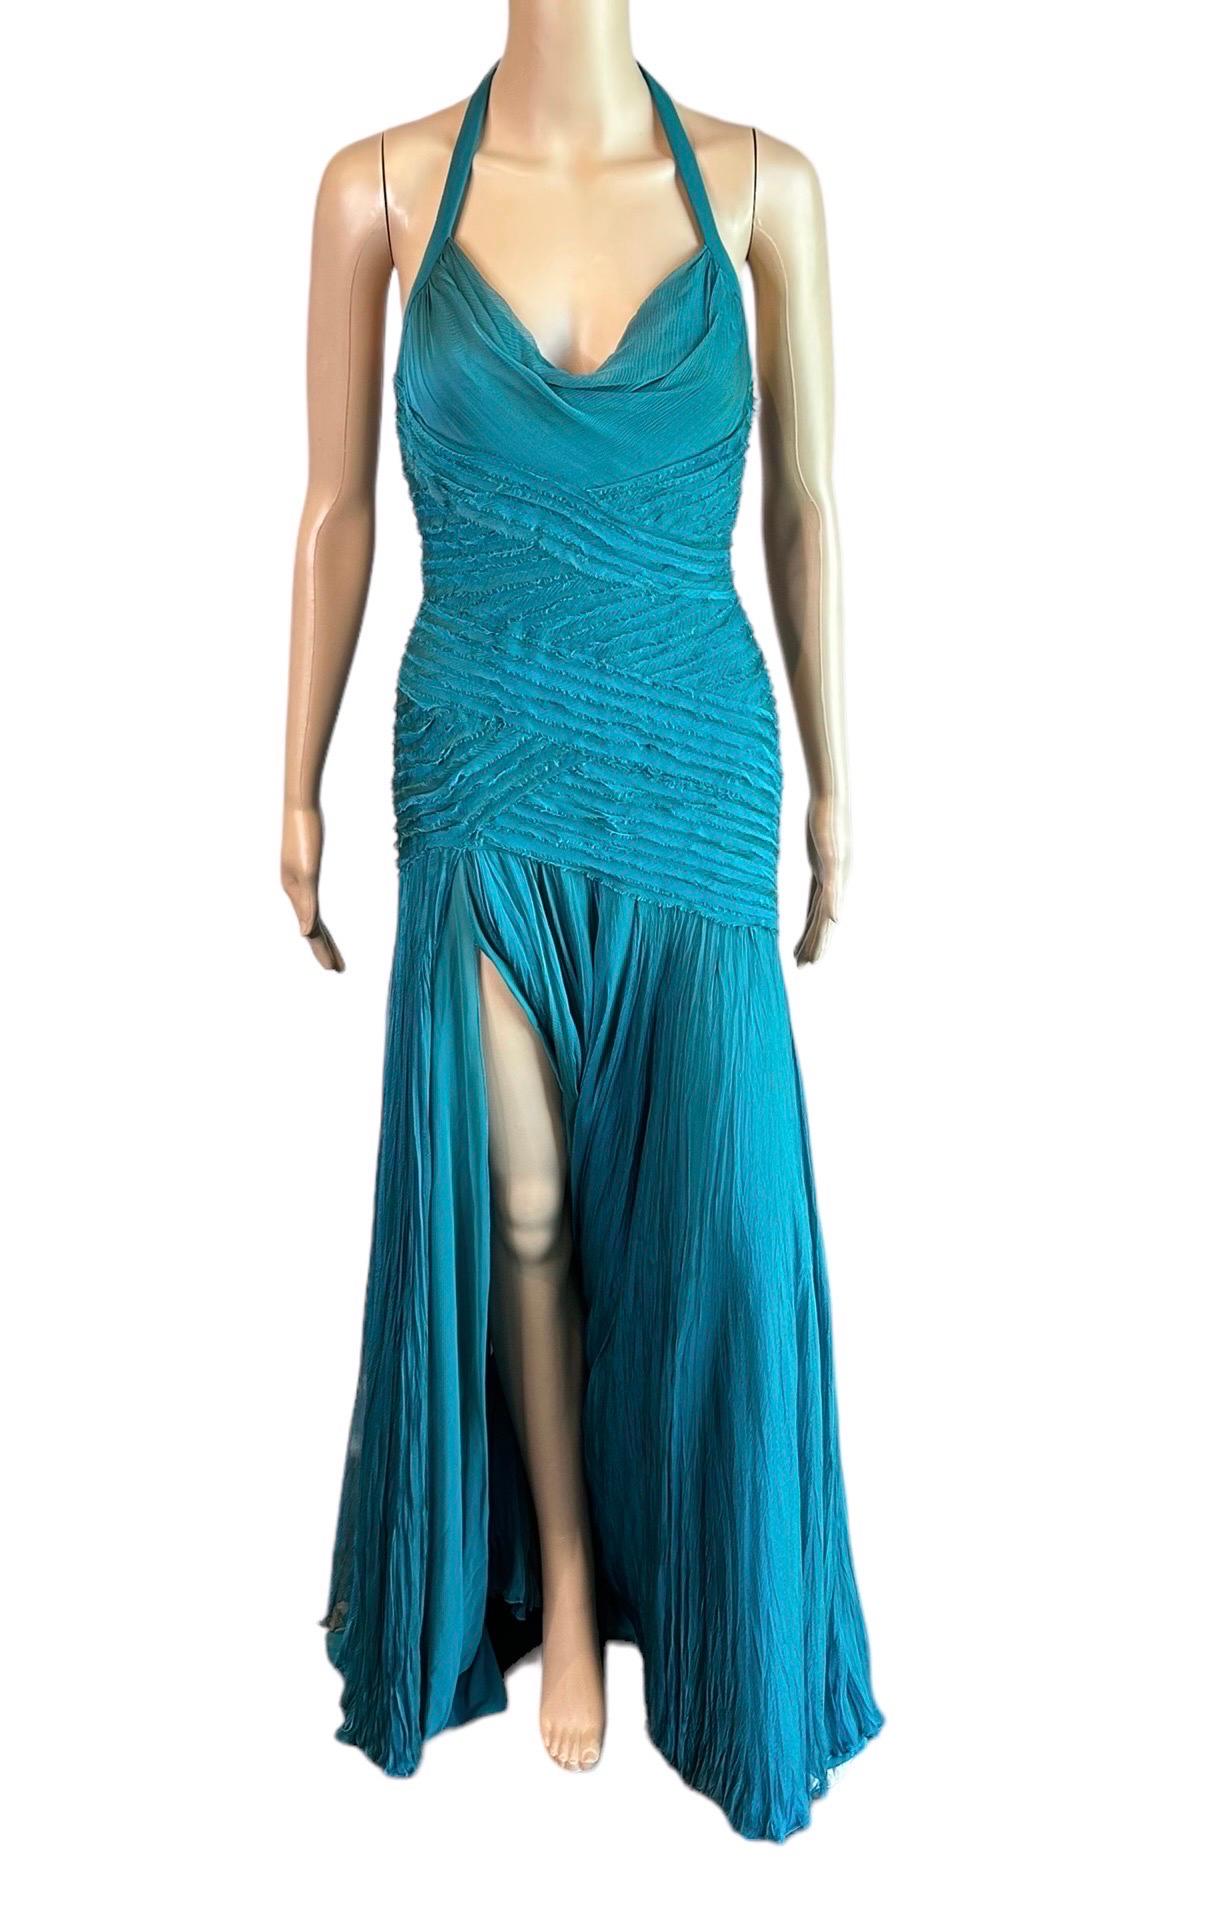 Versace F/W 2005 Runway Campaign Halter High Slit Slip Evening Dress Gown  For Sale 9